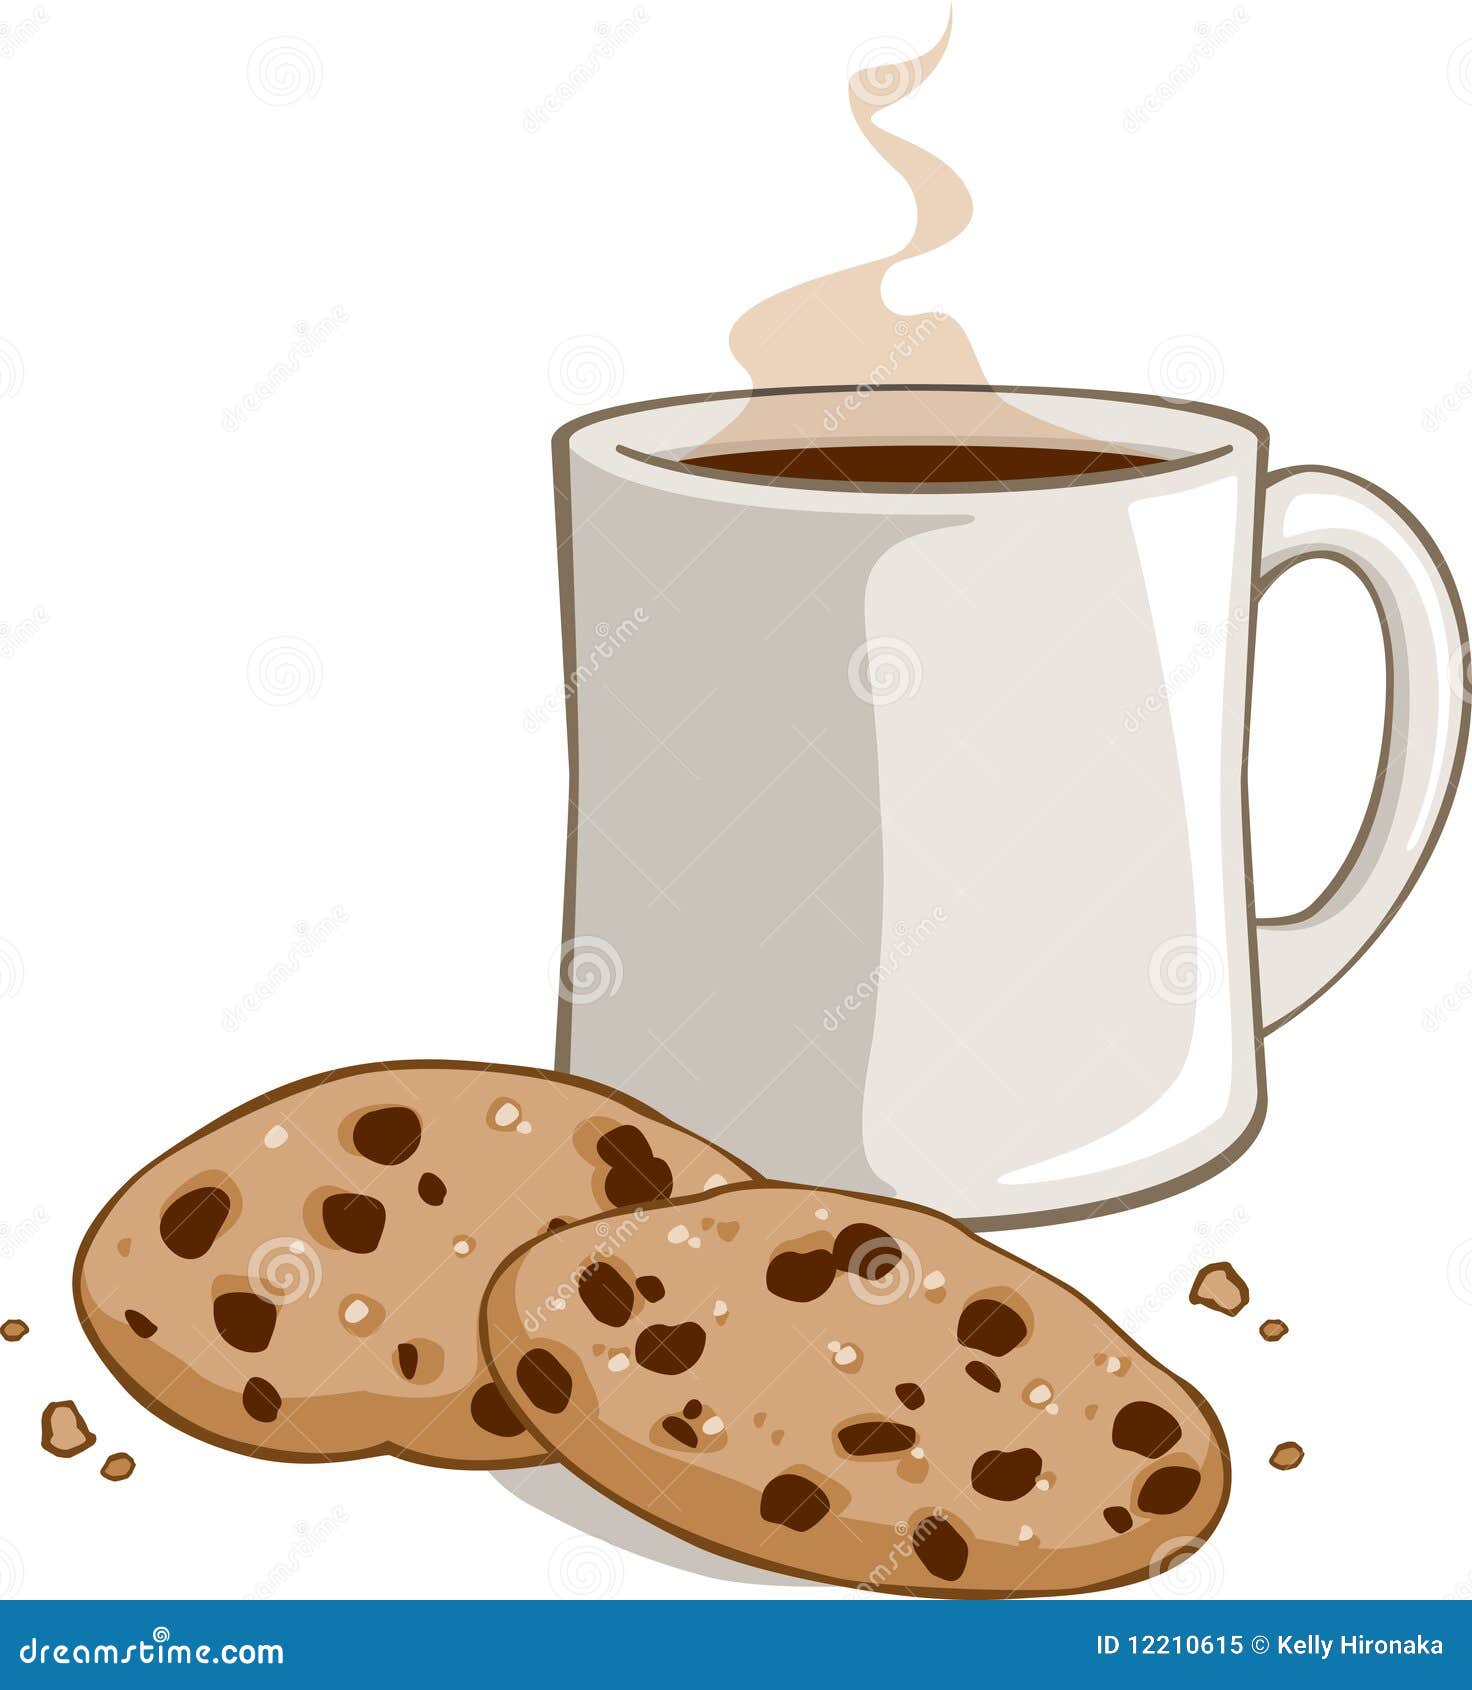 coffee and cookies clipart - photo #3